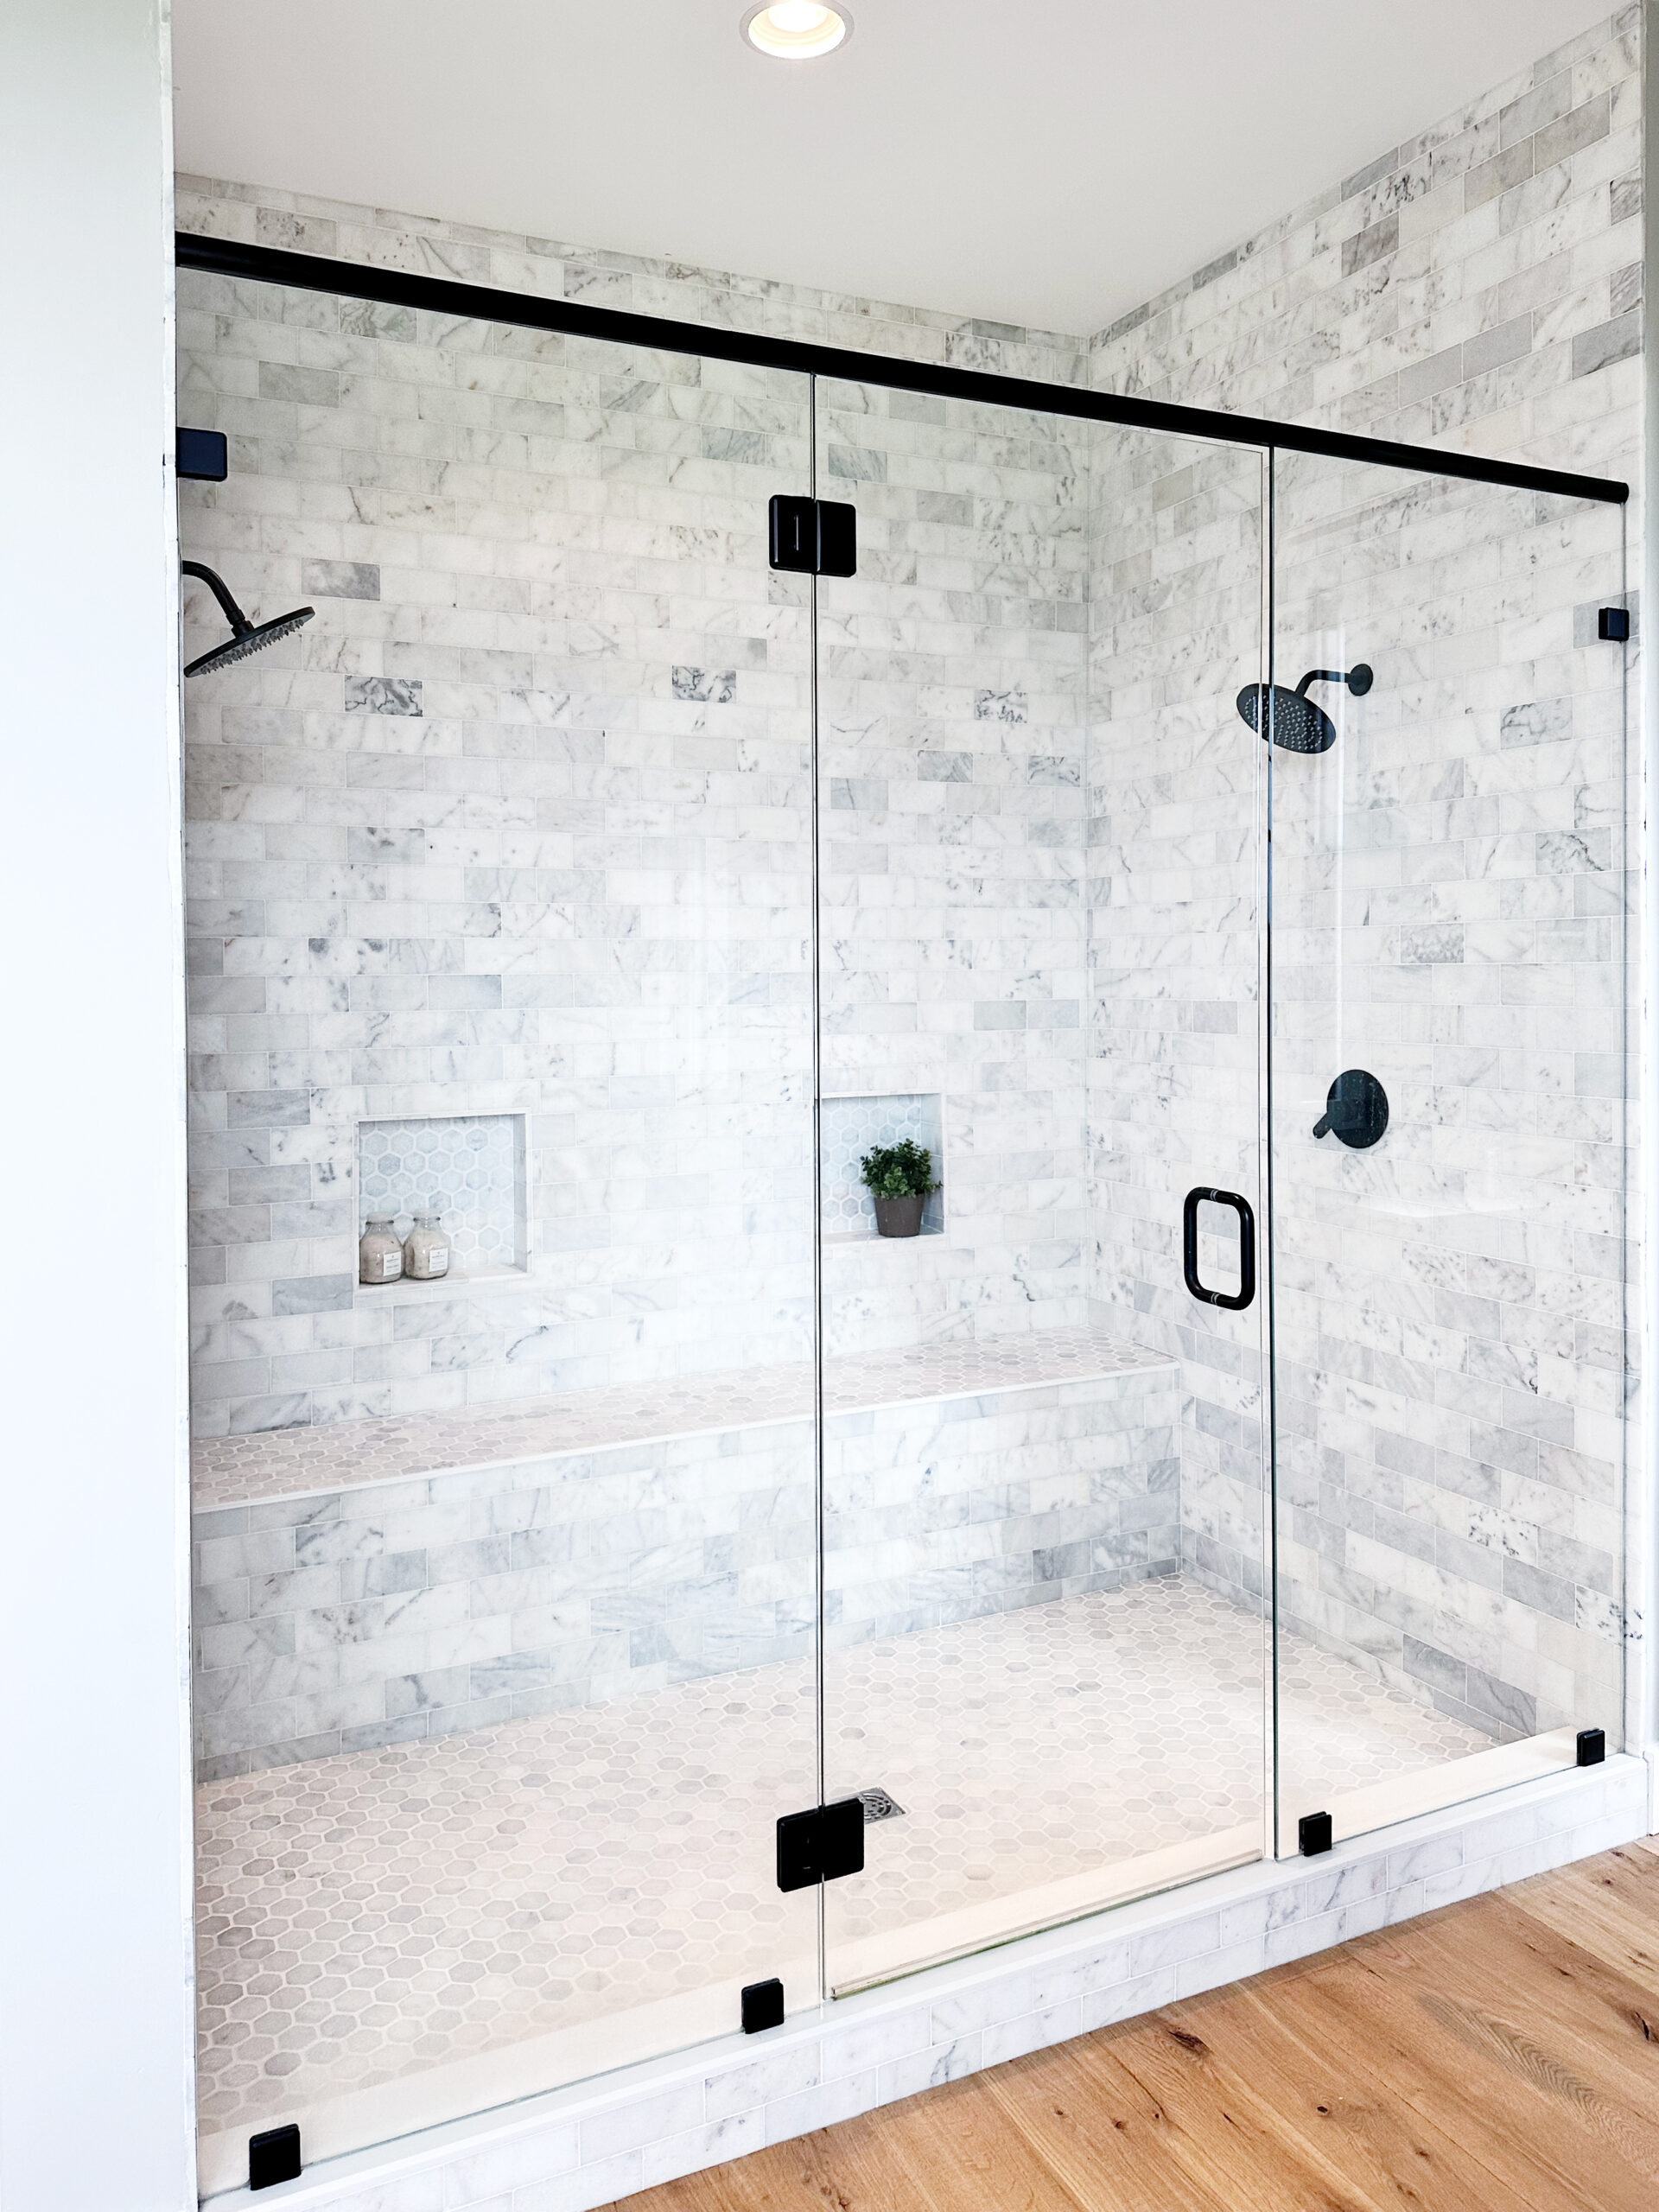 large glass shower with mottled white and black tiling